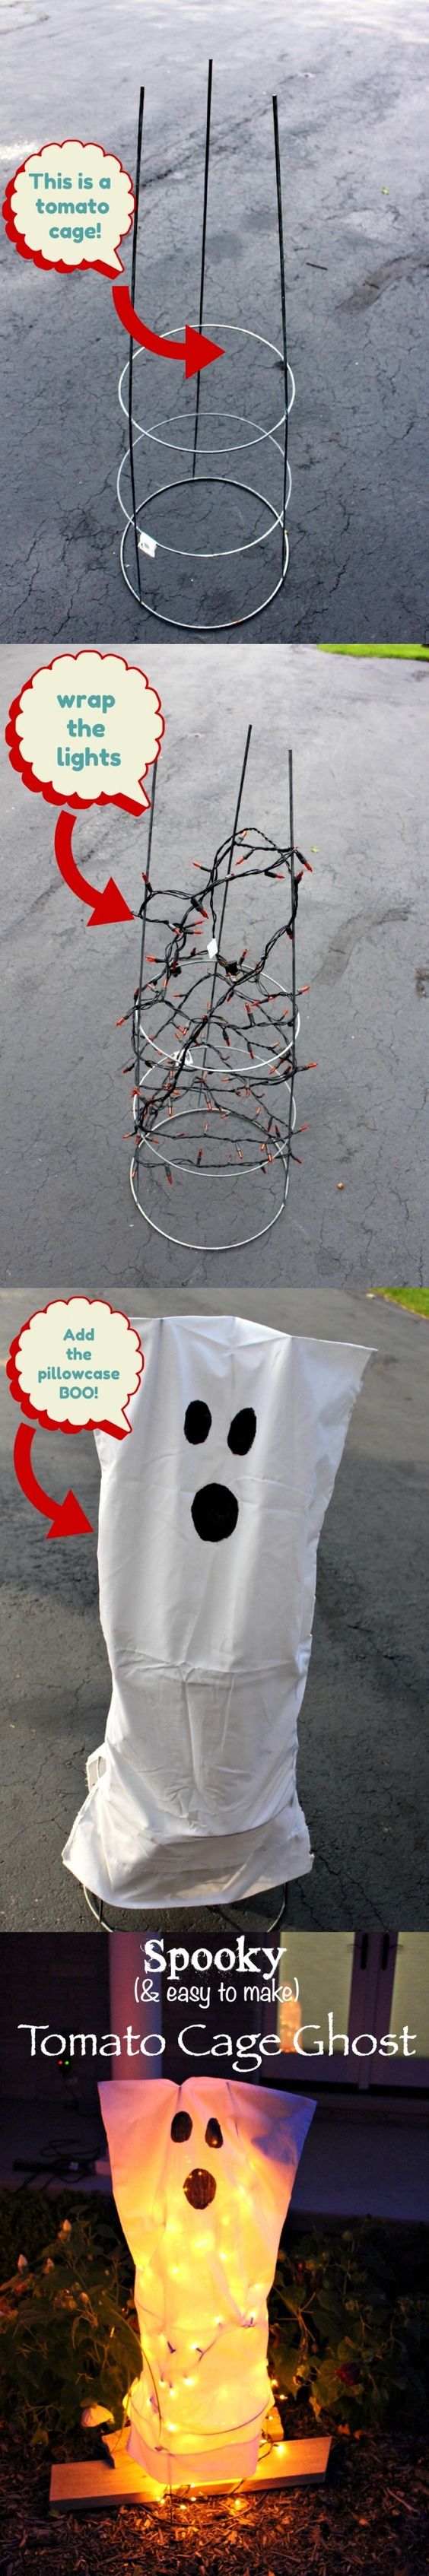 DIY Tomato Cage Ghosts. 